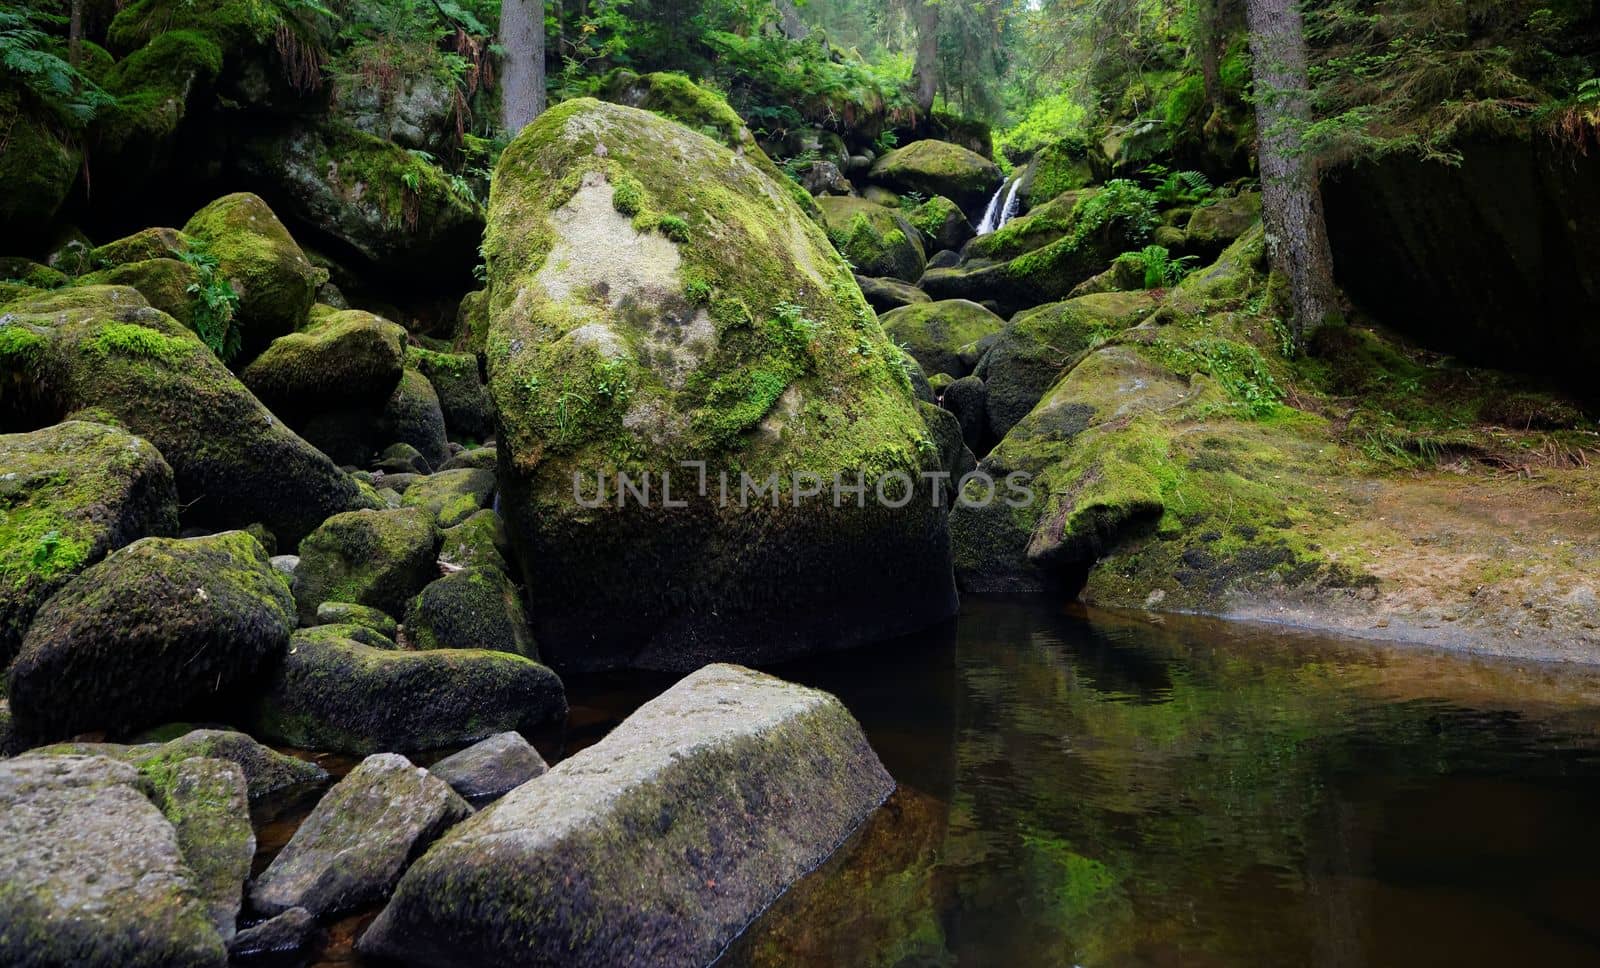 Moss and lichen covered boulders in Triberg waterfall in Germany by slavapolo